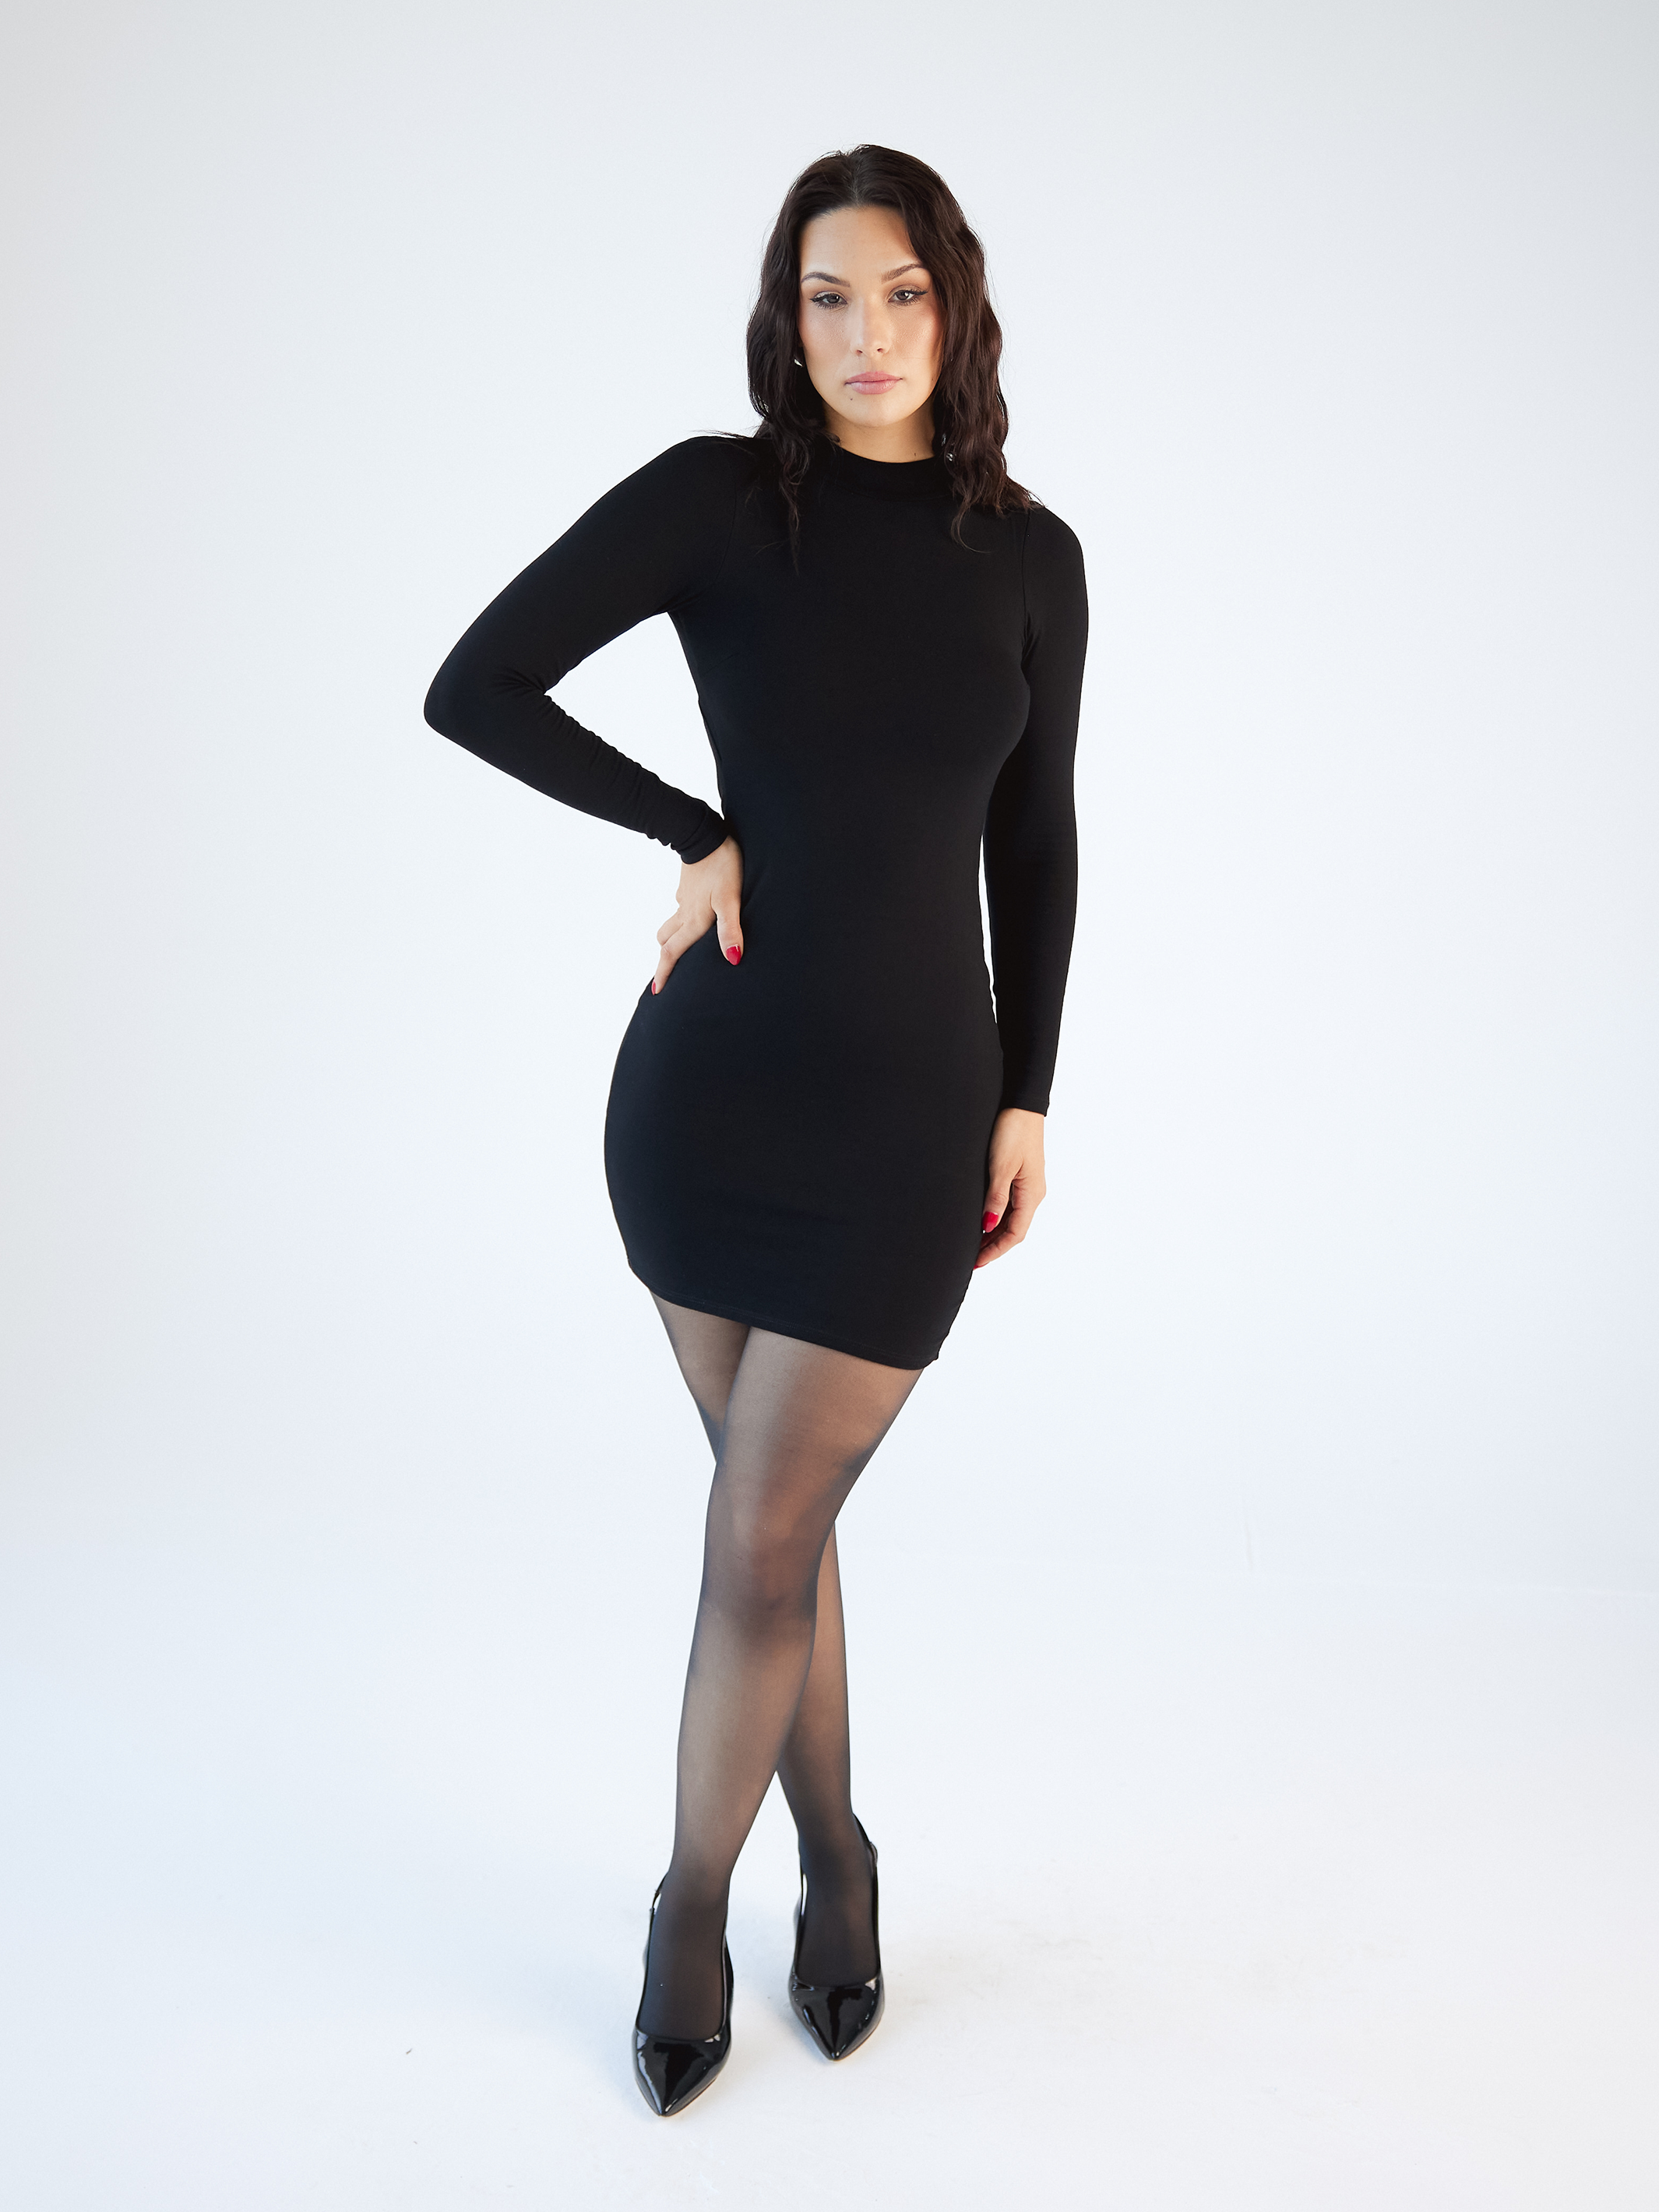 Turtleneck mini dress mesh net pantyhose and navy blue tights and